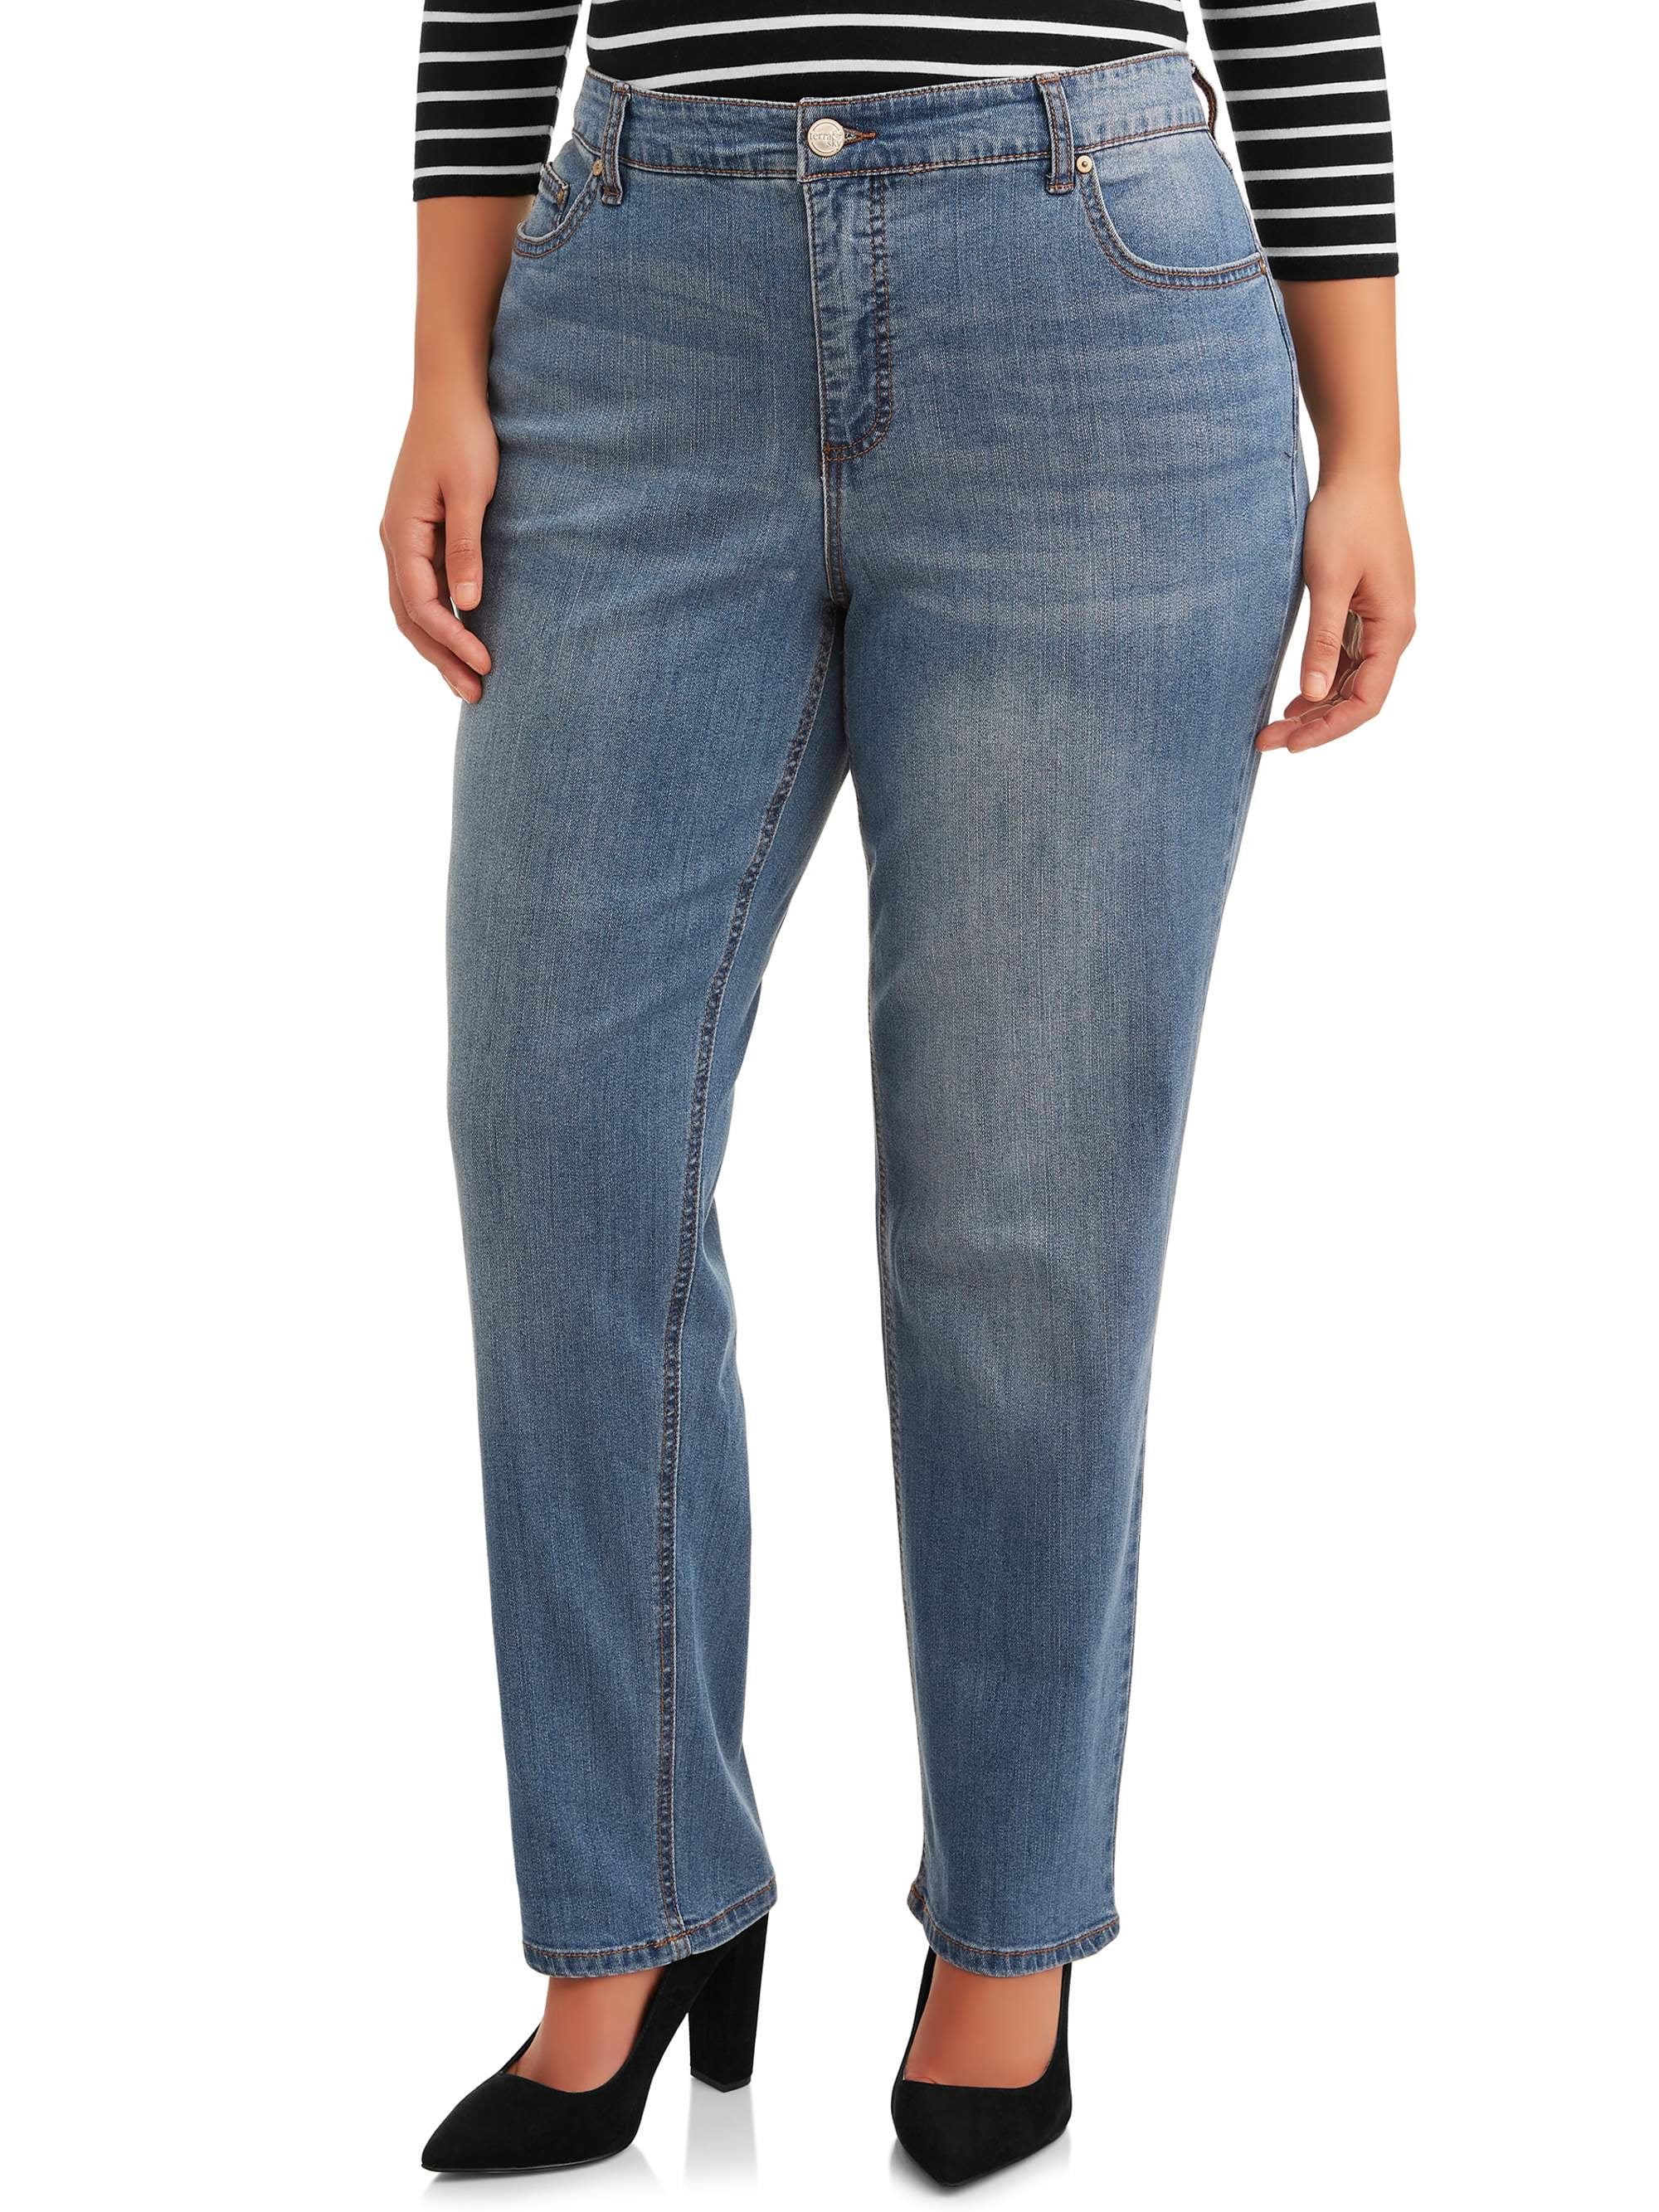 terra and sky plus size jeans